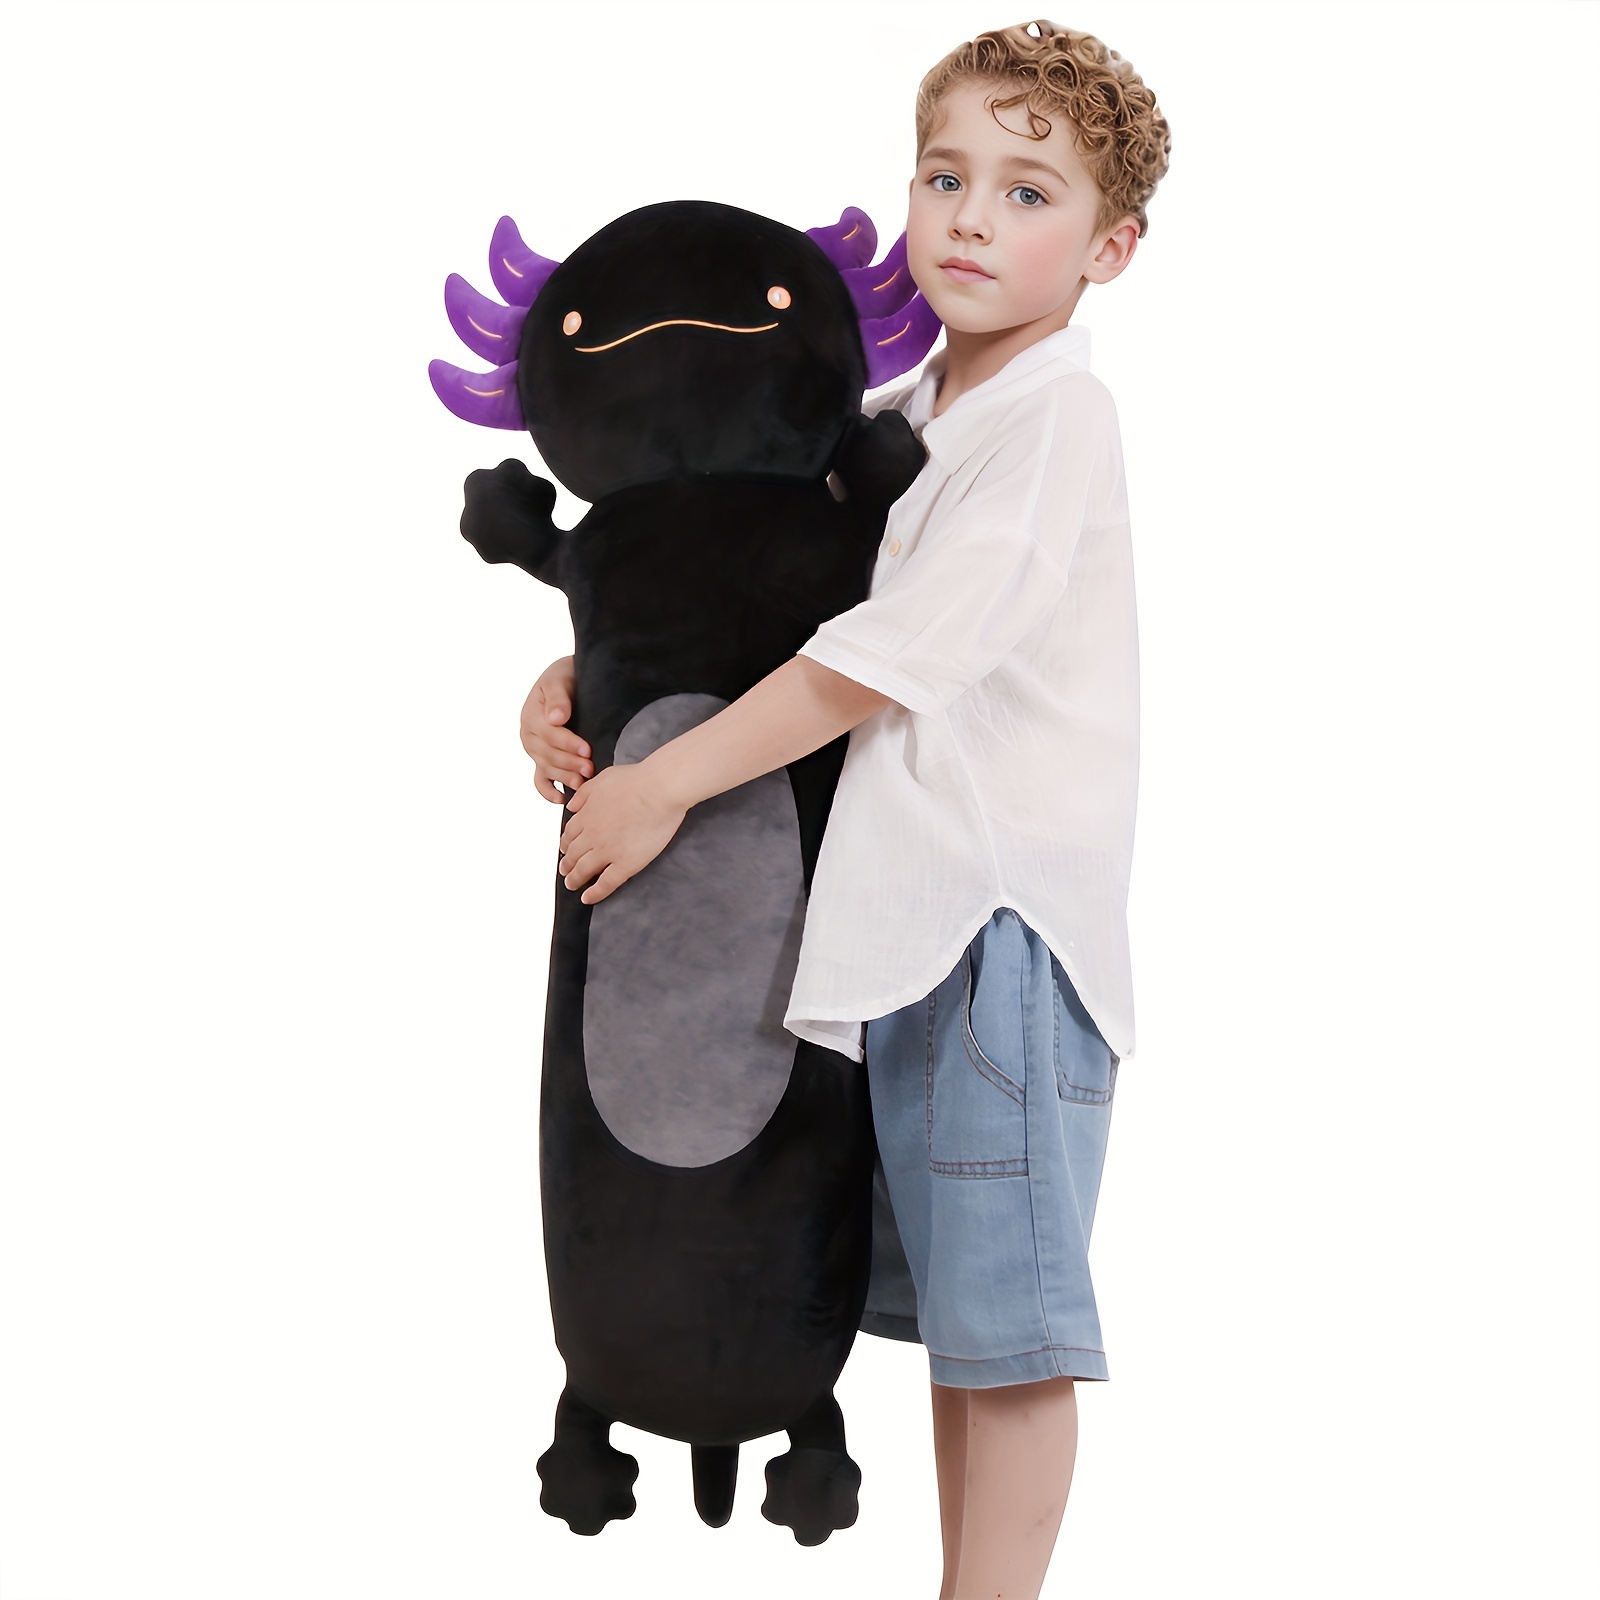 

Giant 36-inch Axolotl Stuffed Animal Plush – Soft Cuddly Salamander Toy – Large Plushie For All Ages, Exquisite Craftsmanship – Perfect Birthday Gift For Children, Skin-friendly Fabric